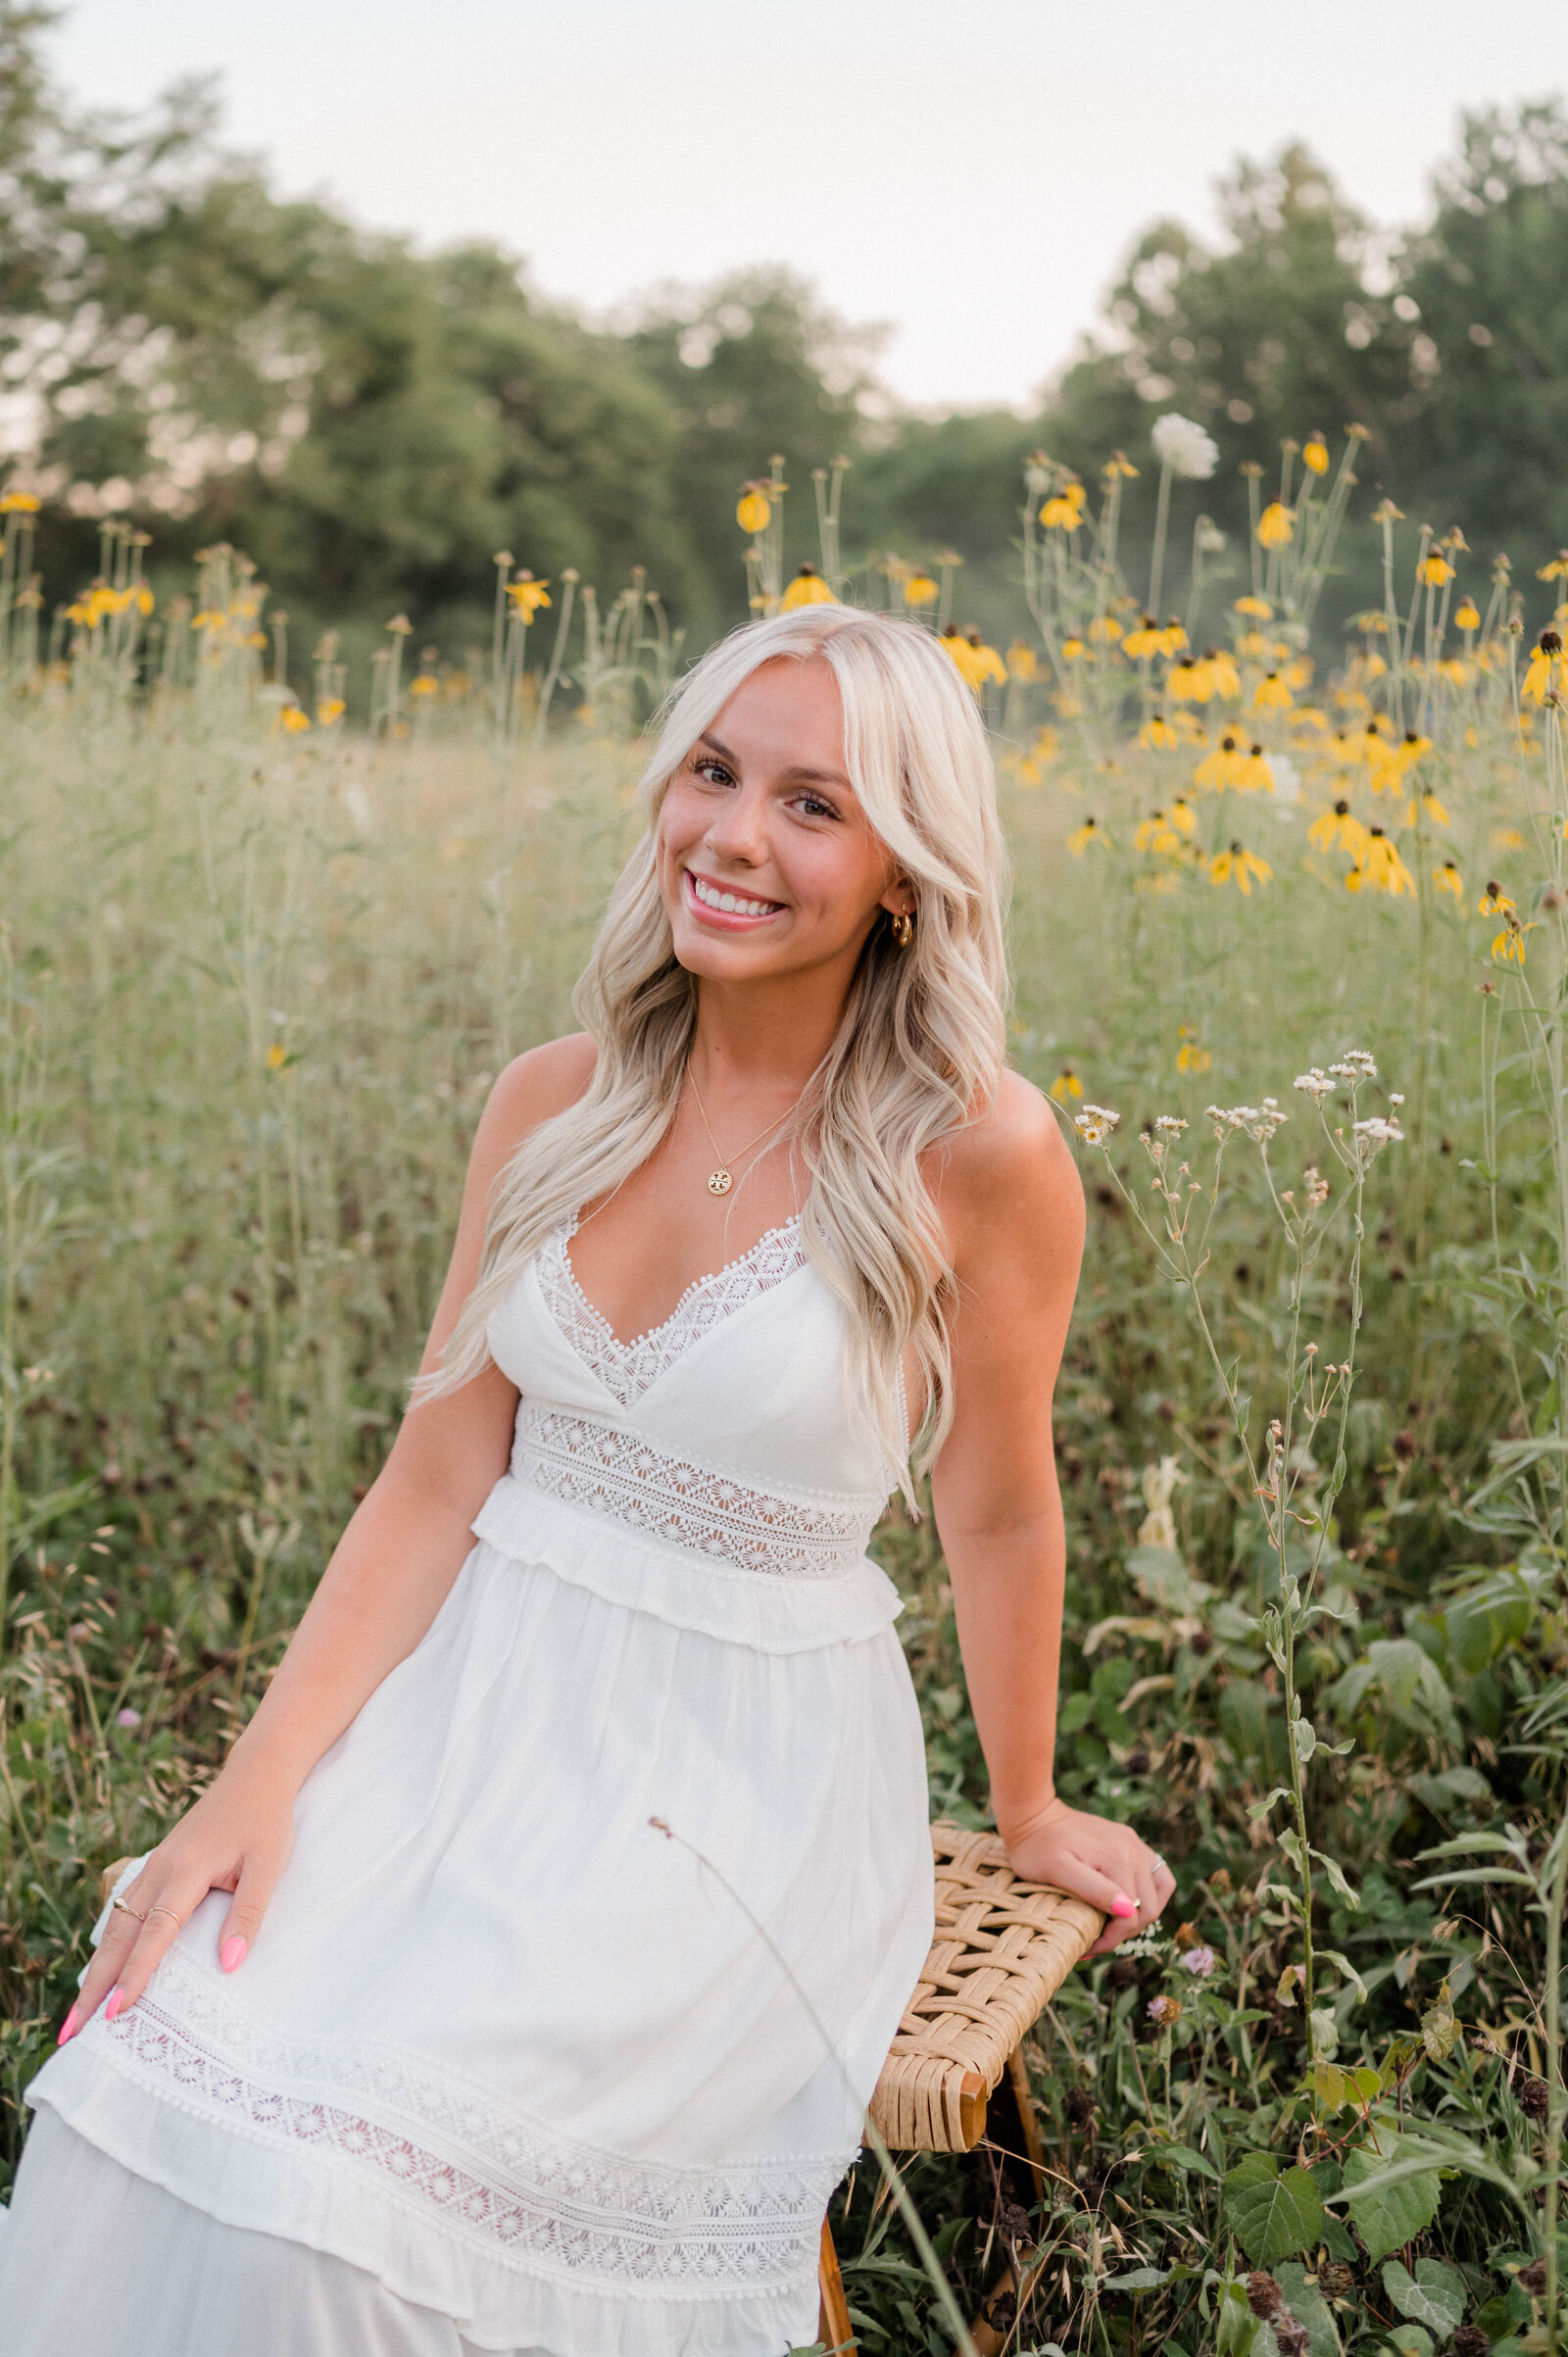 Girl in white dress poses in field with yellow flowers